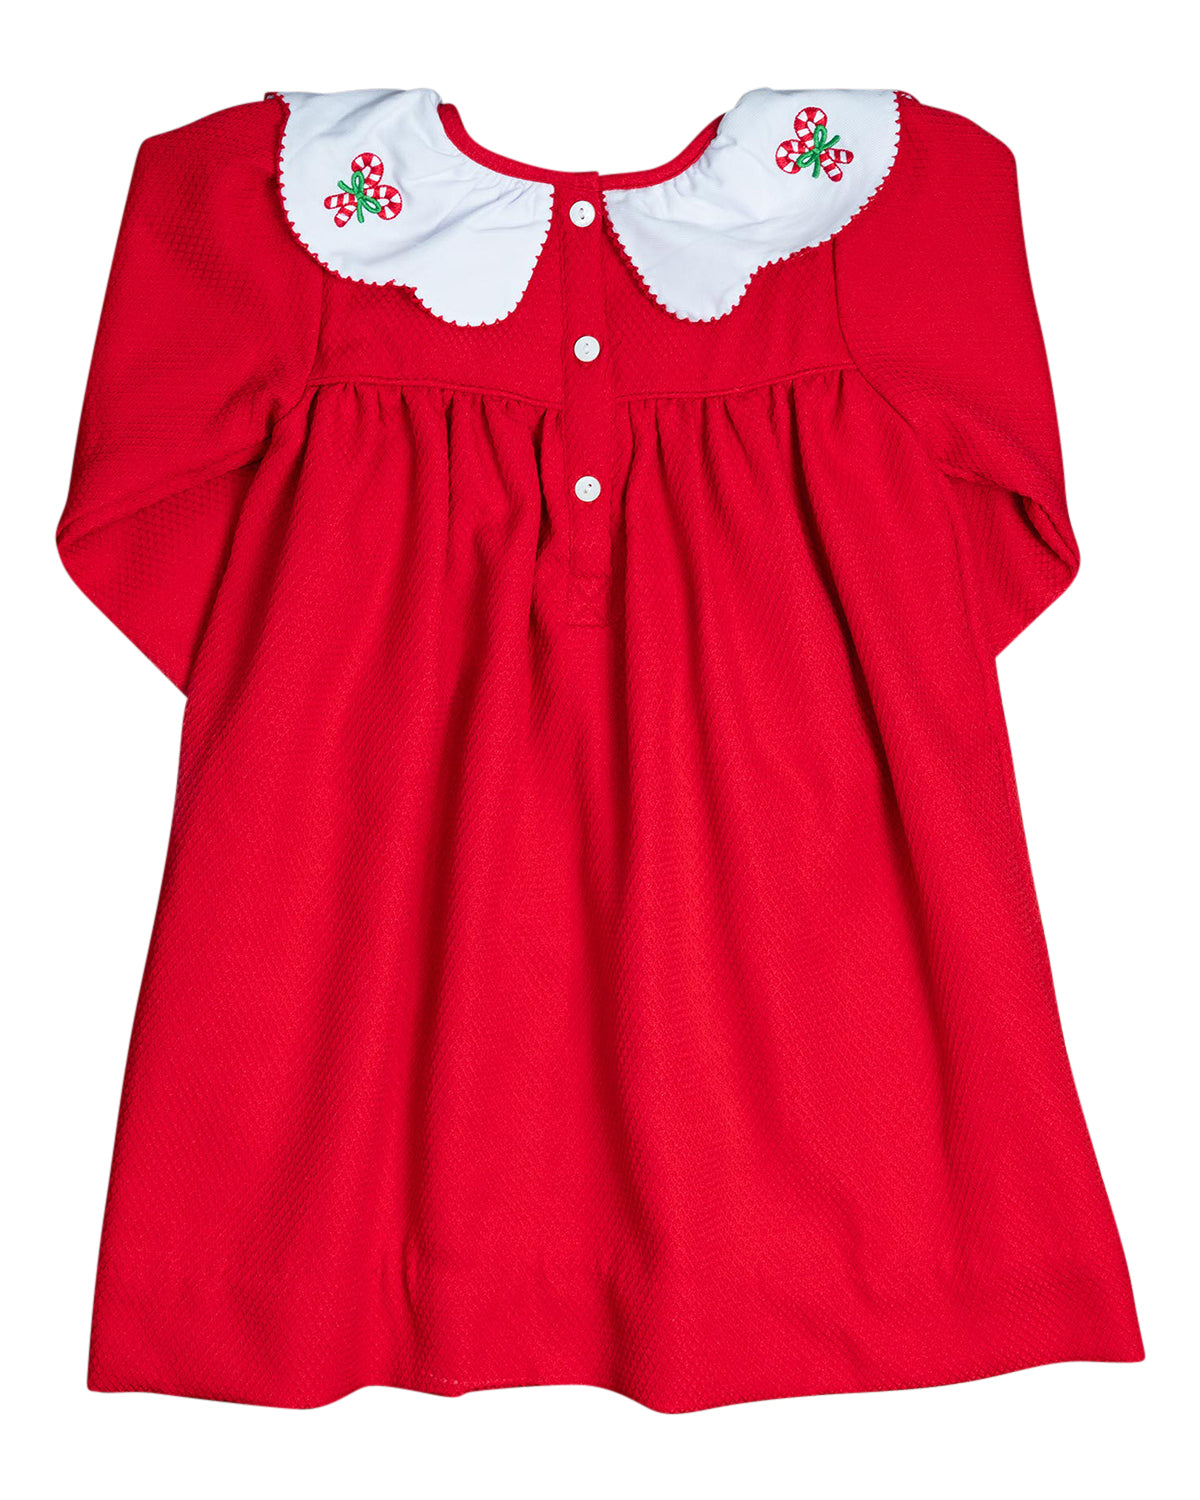 Candy Canes Red Pique Dress